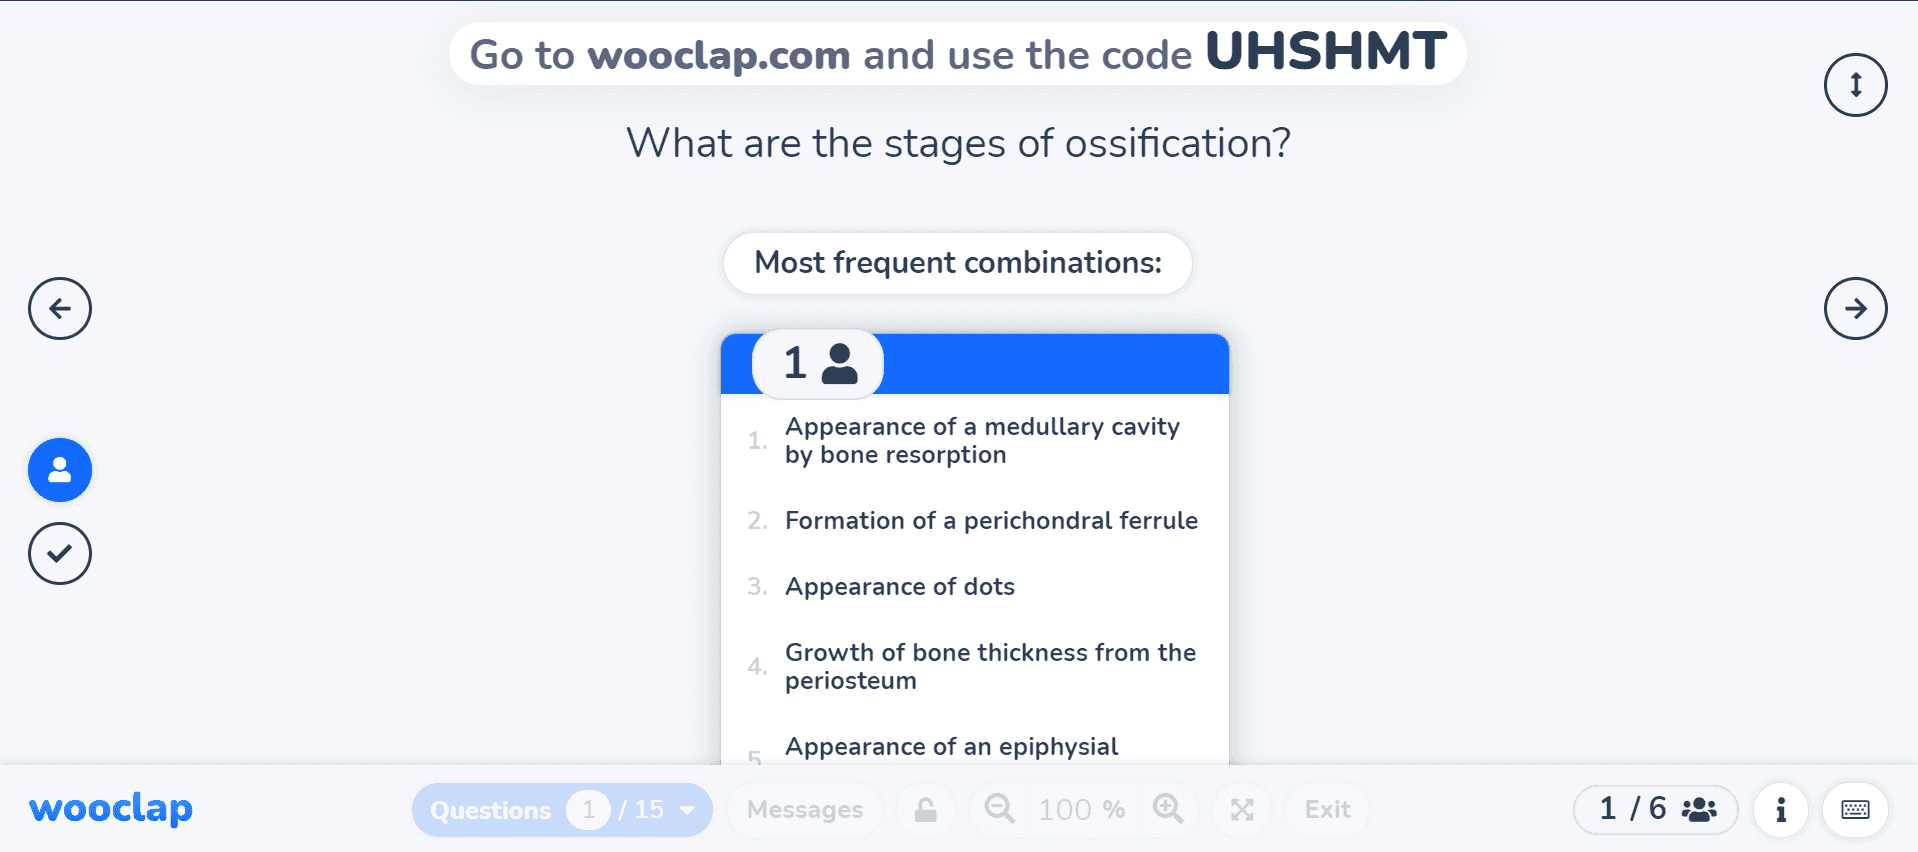 What are the stages of ossification?
